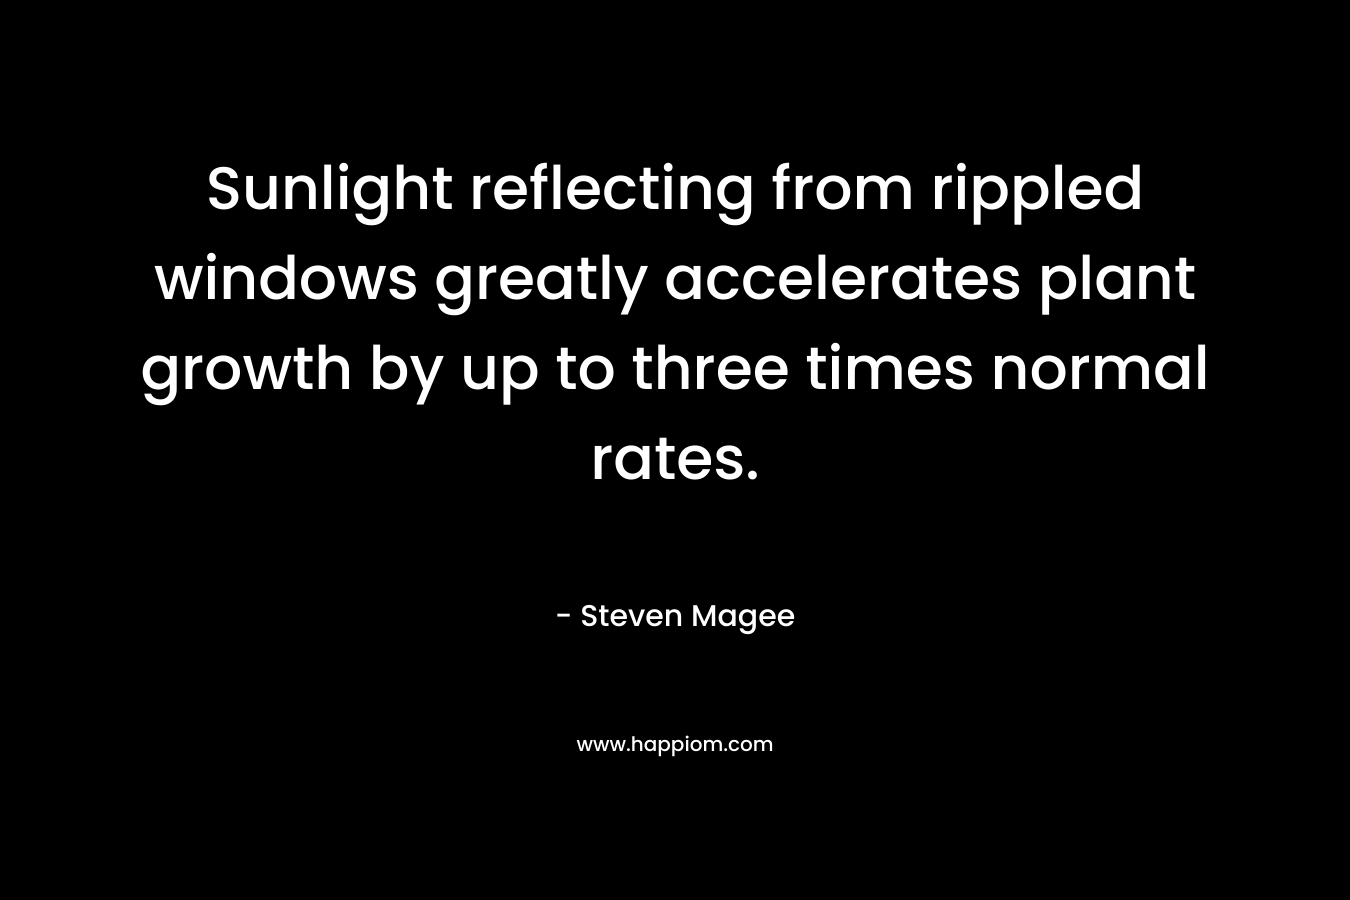 Sunlight reflecting from rippled windows greatly accelerates plant growth by up to three times normal rates.